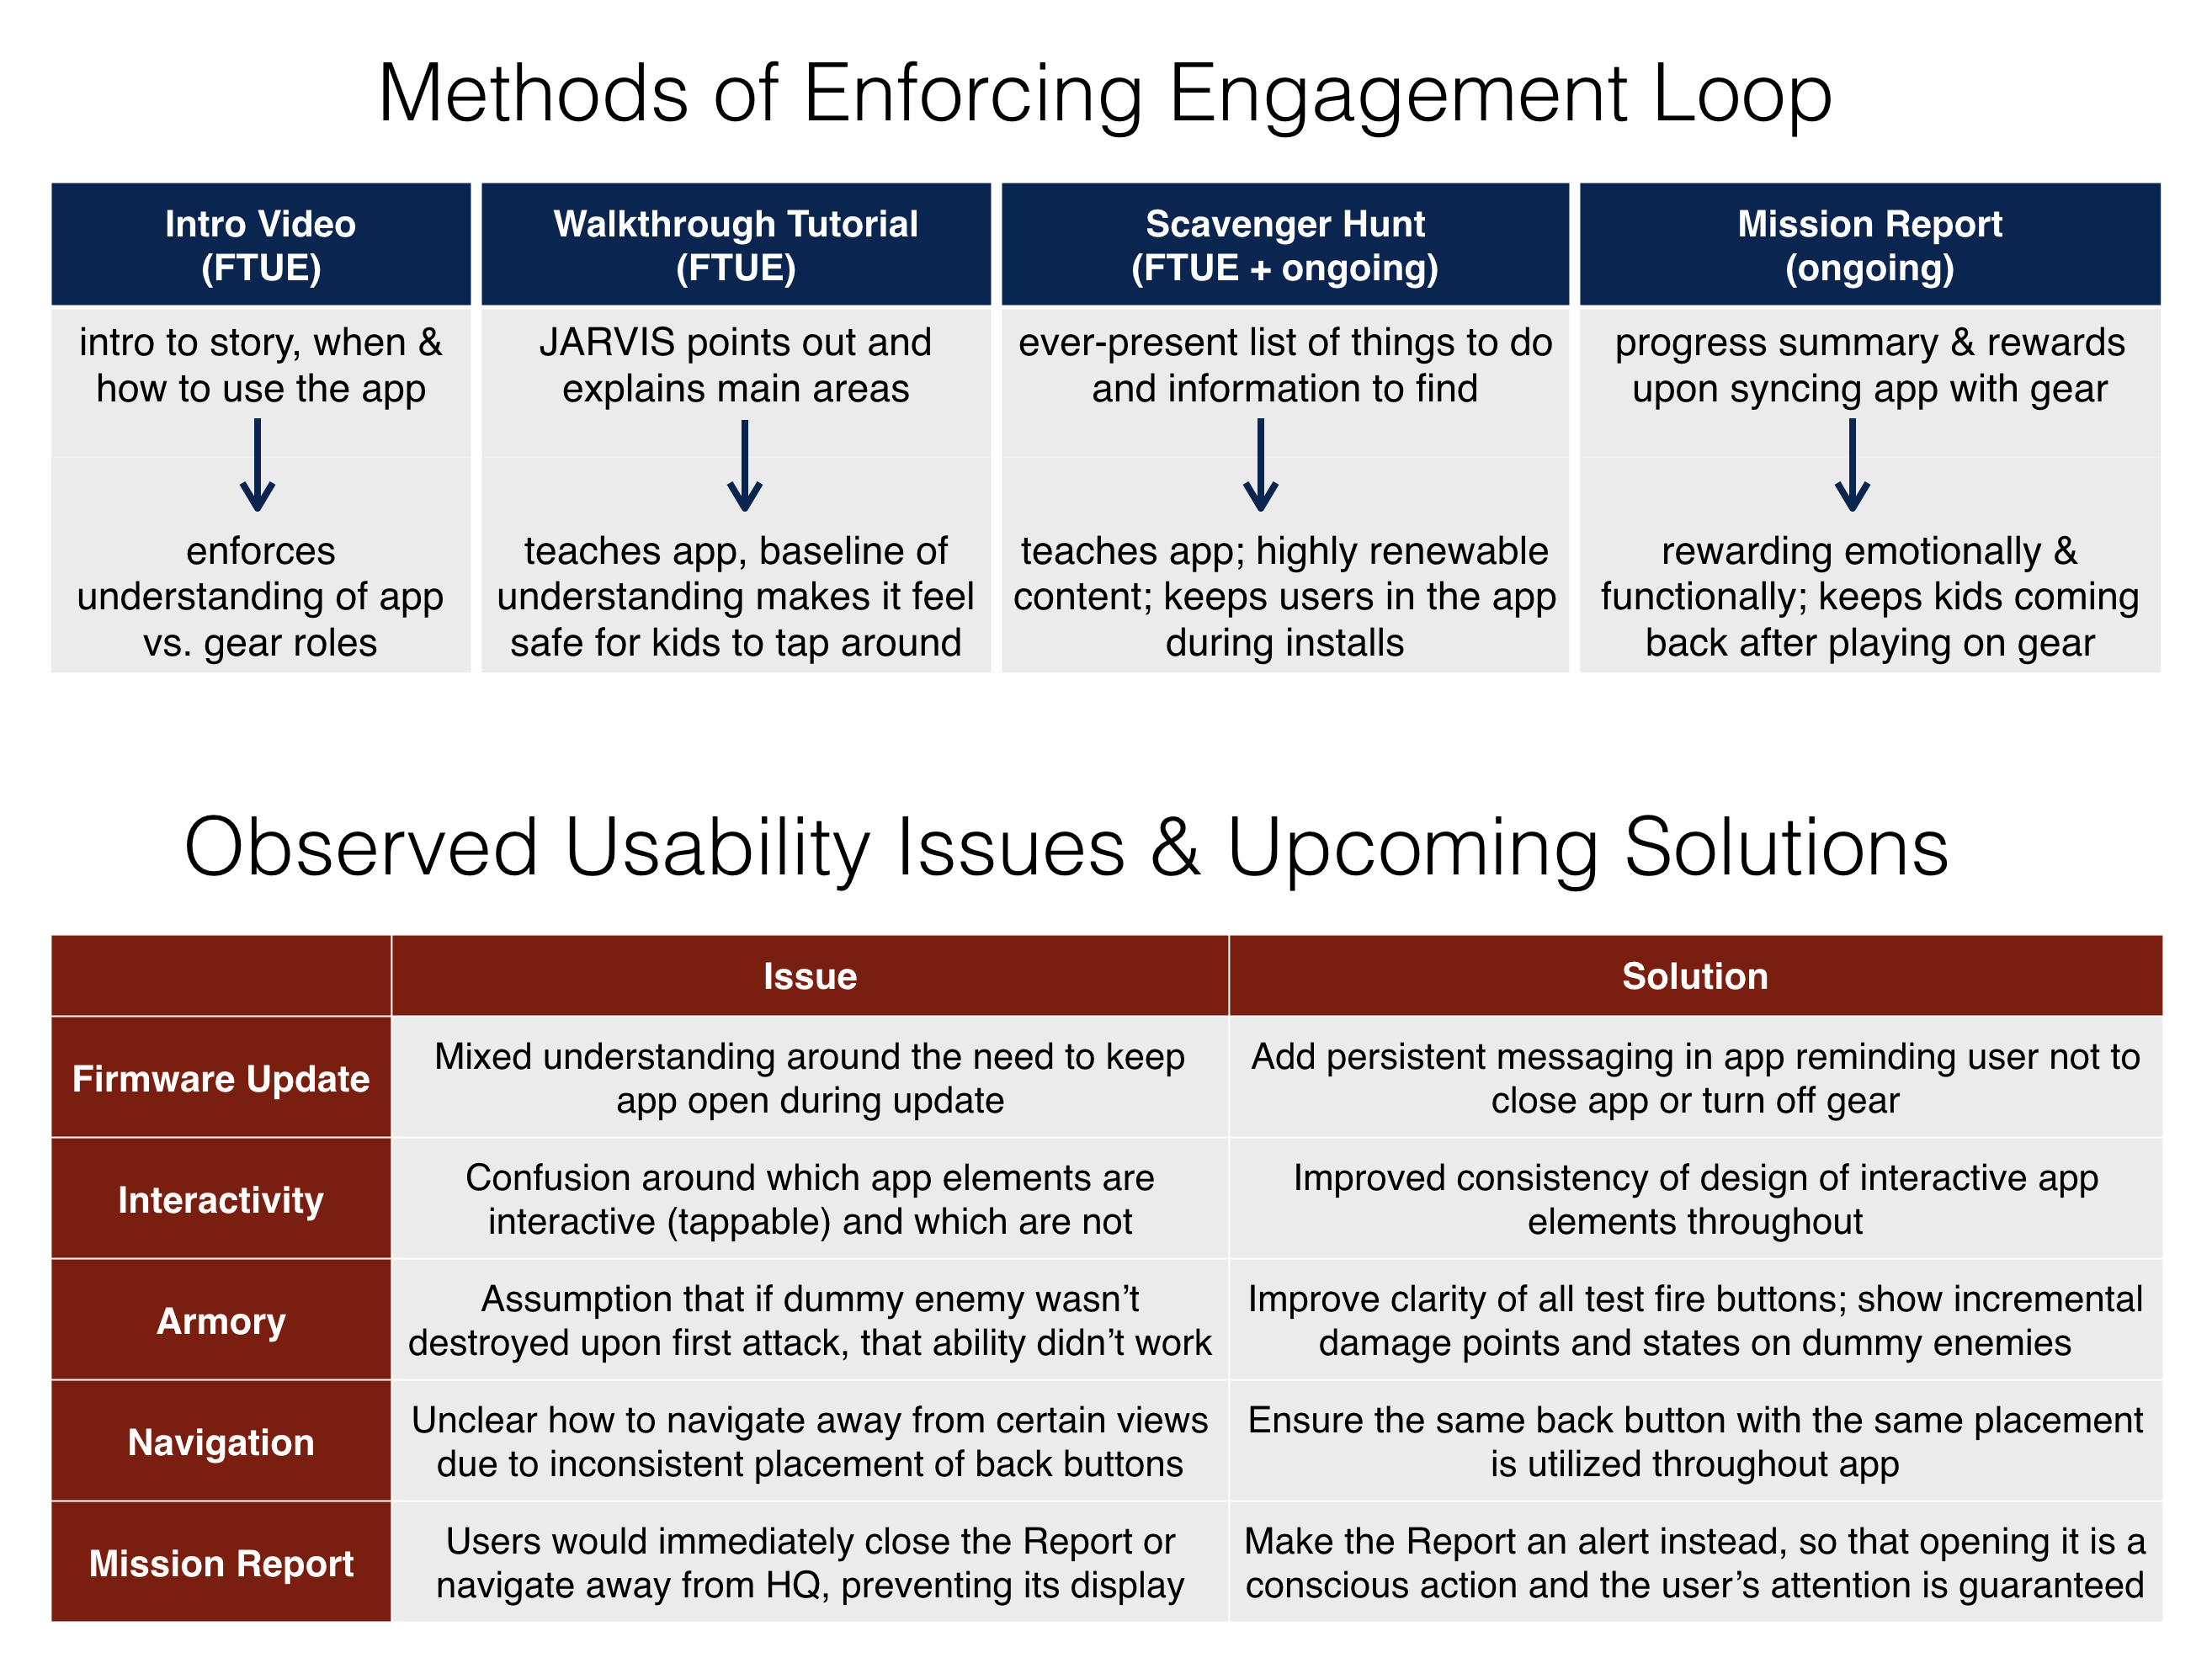 Chart detailing methods of enforcing an engagement loop and observed usability issues